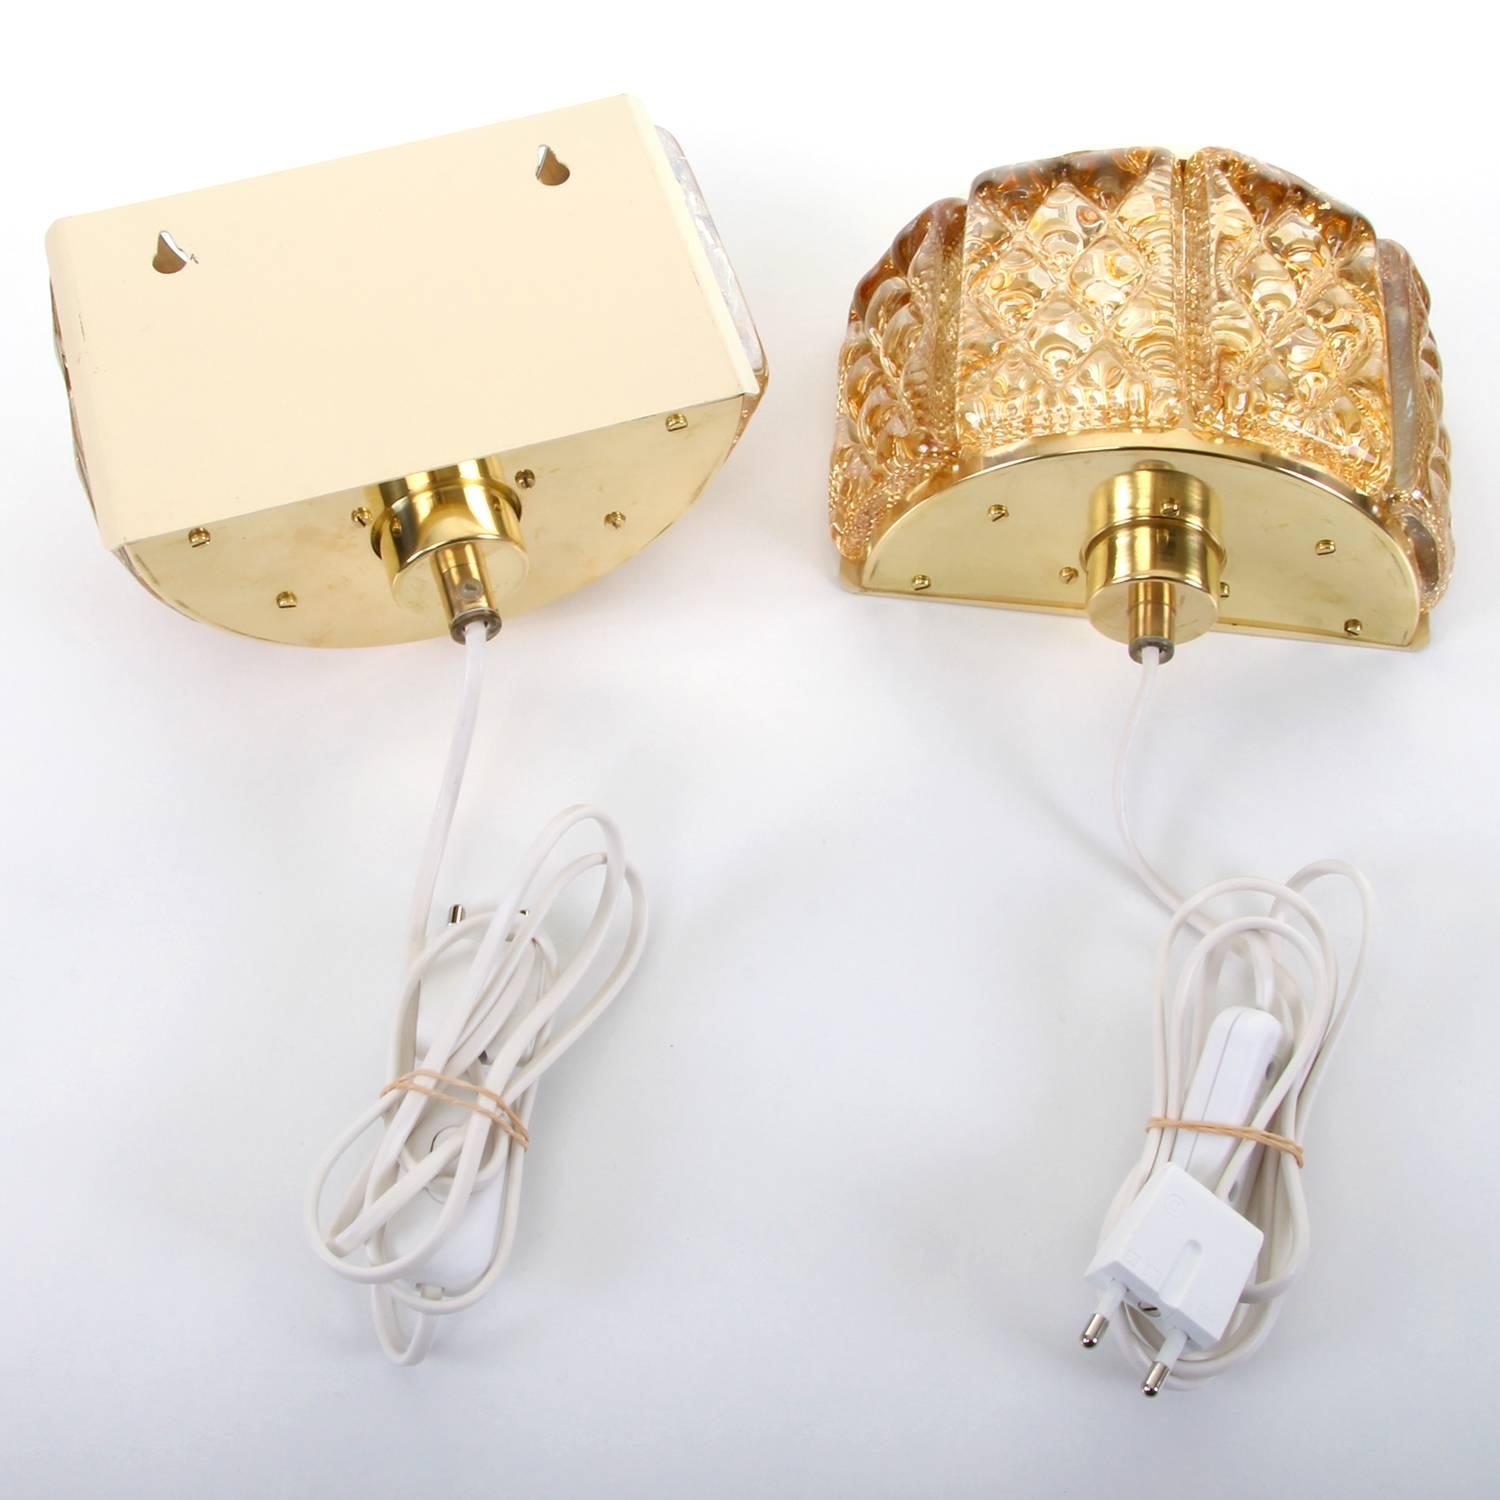 Gallalampet, Pair of Sconces by Vitrika, 1970s, Brass & Golden Glass Wall Lamps For Sale 2